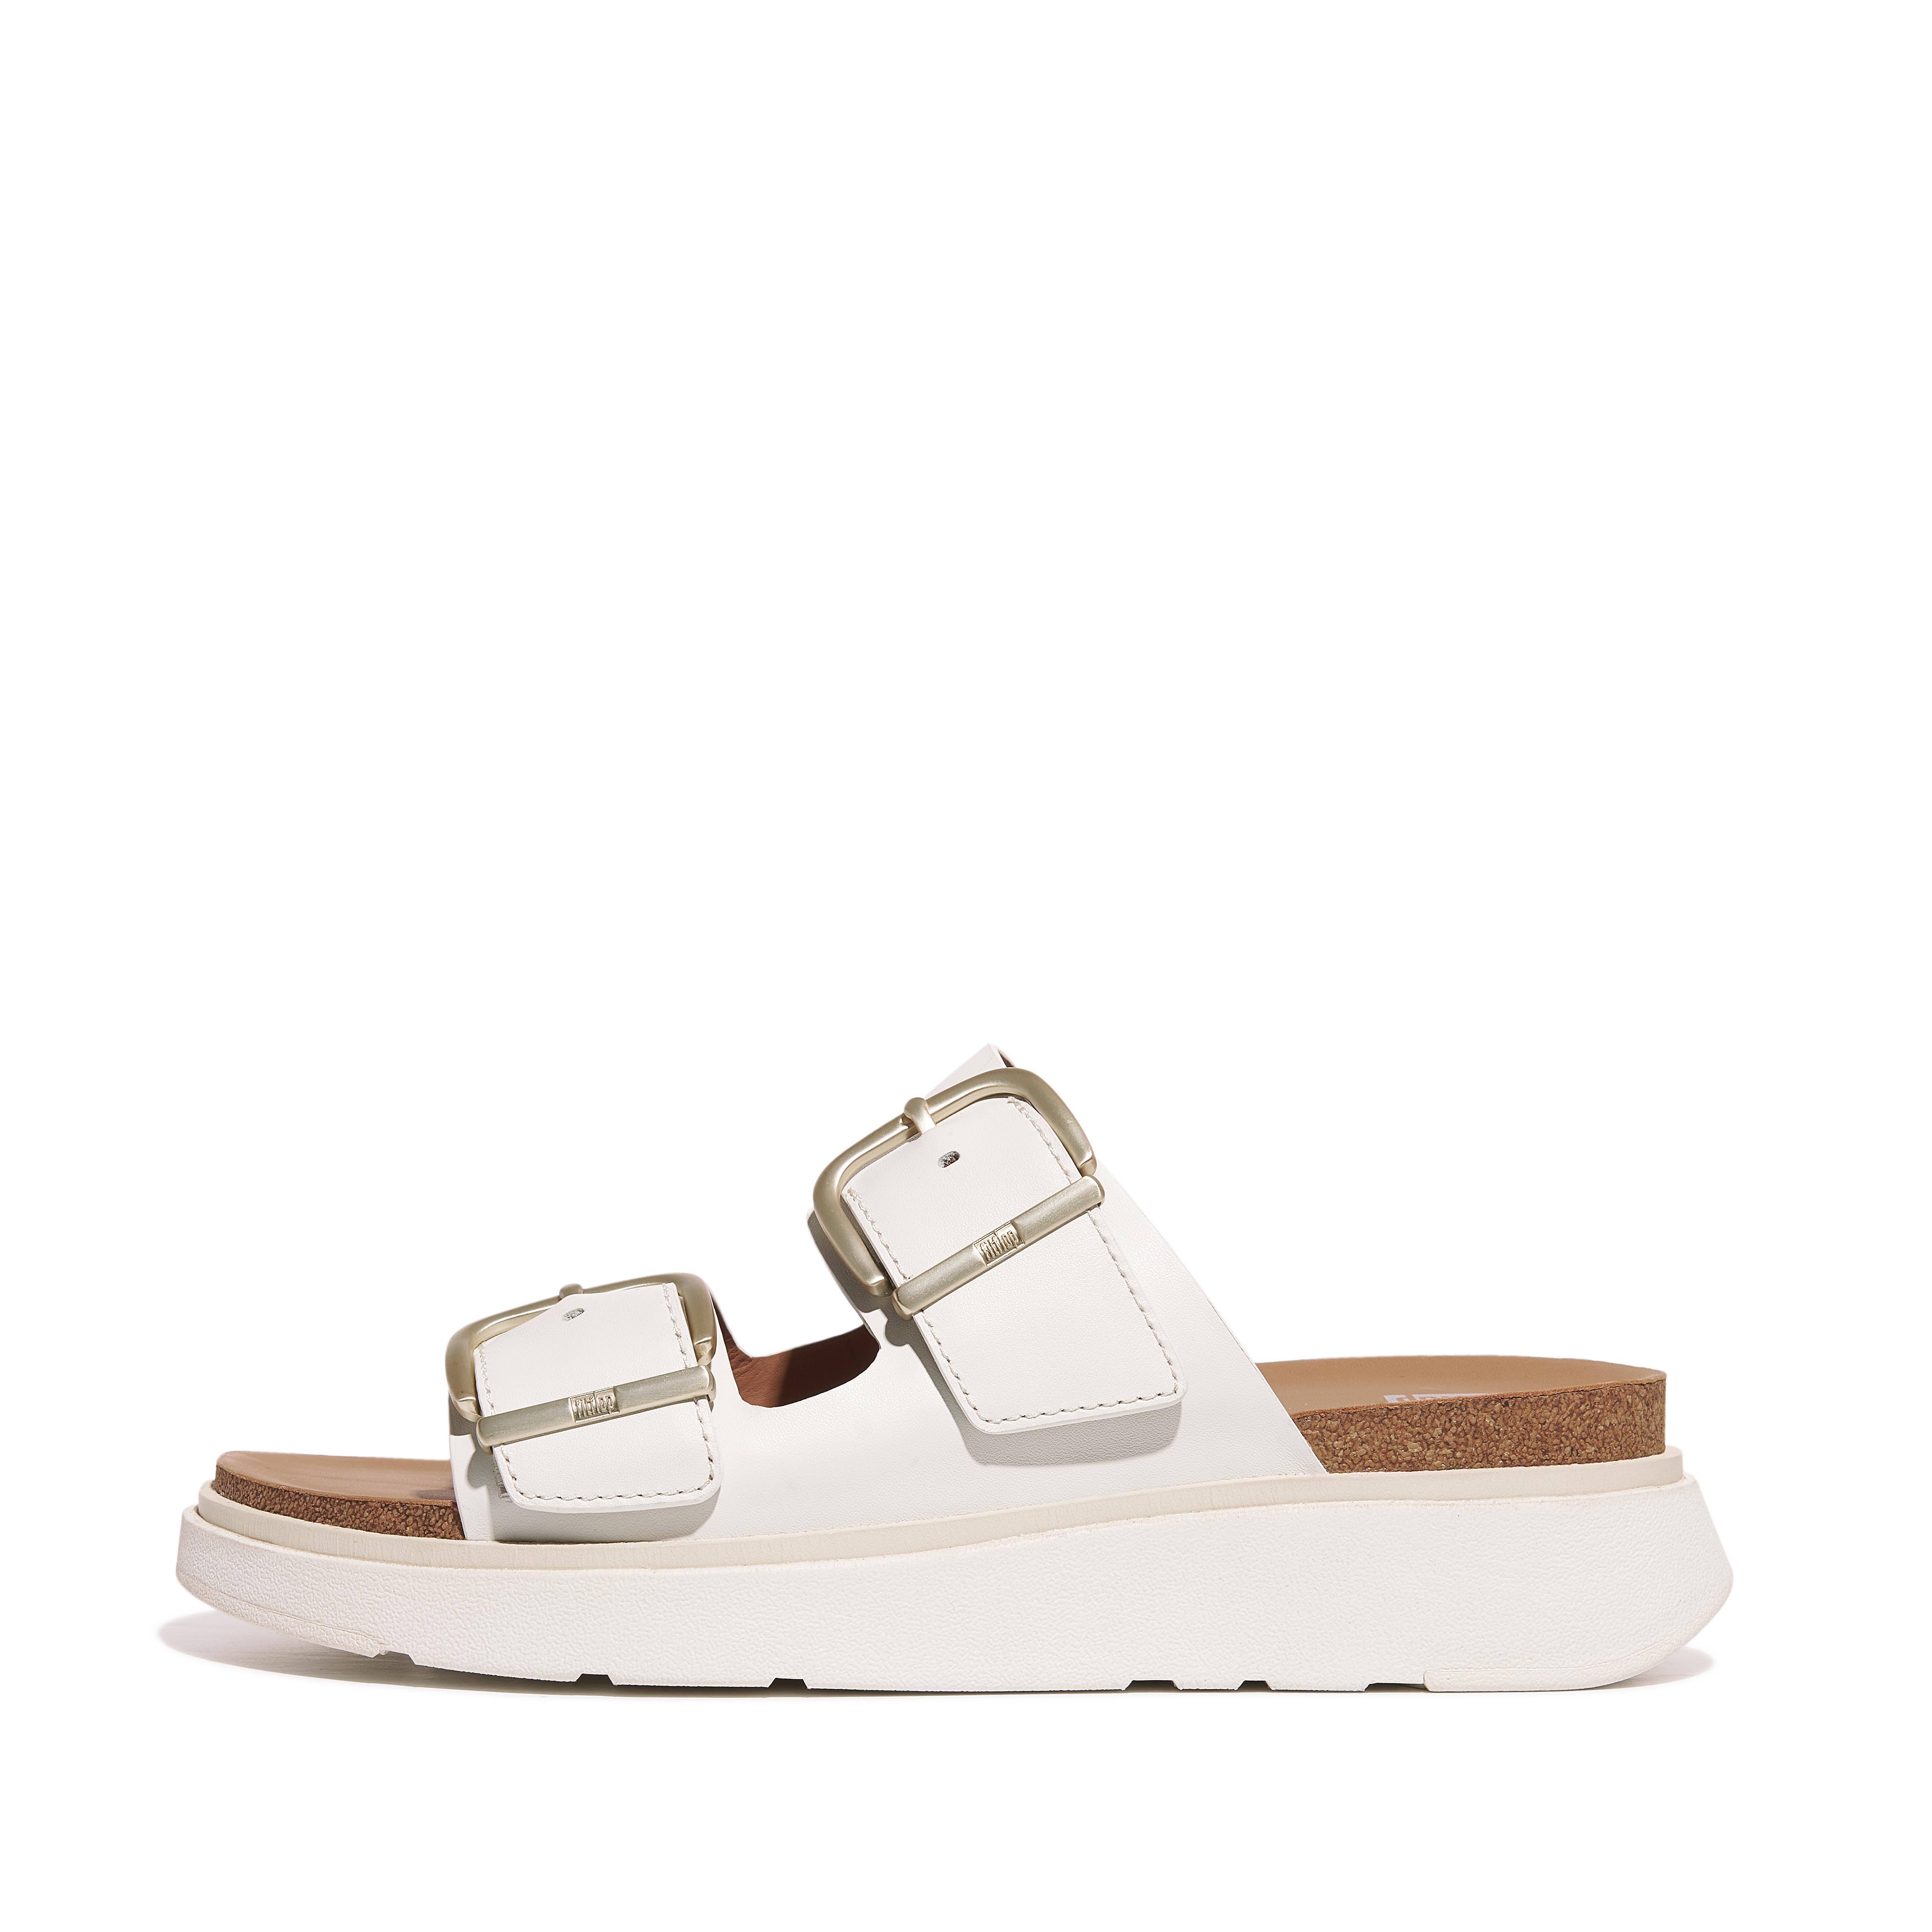 Fitflop Buckle Two-Bar Leather Slides,Urban White